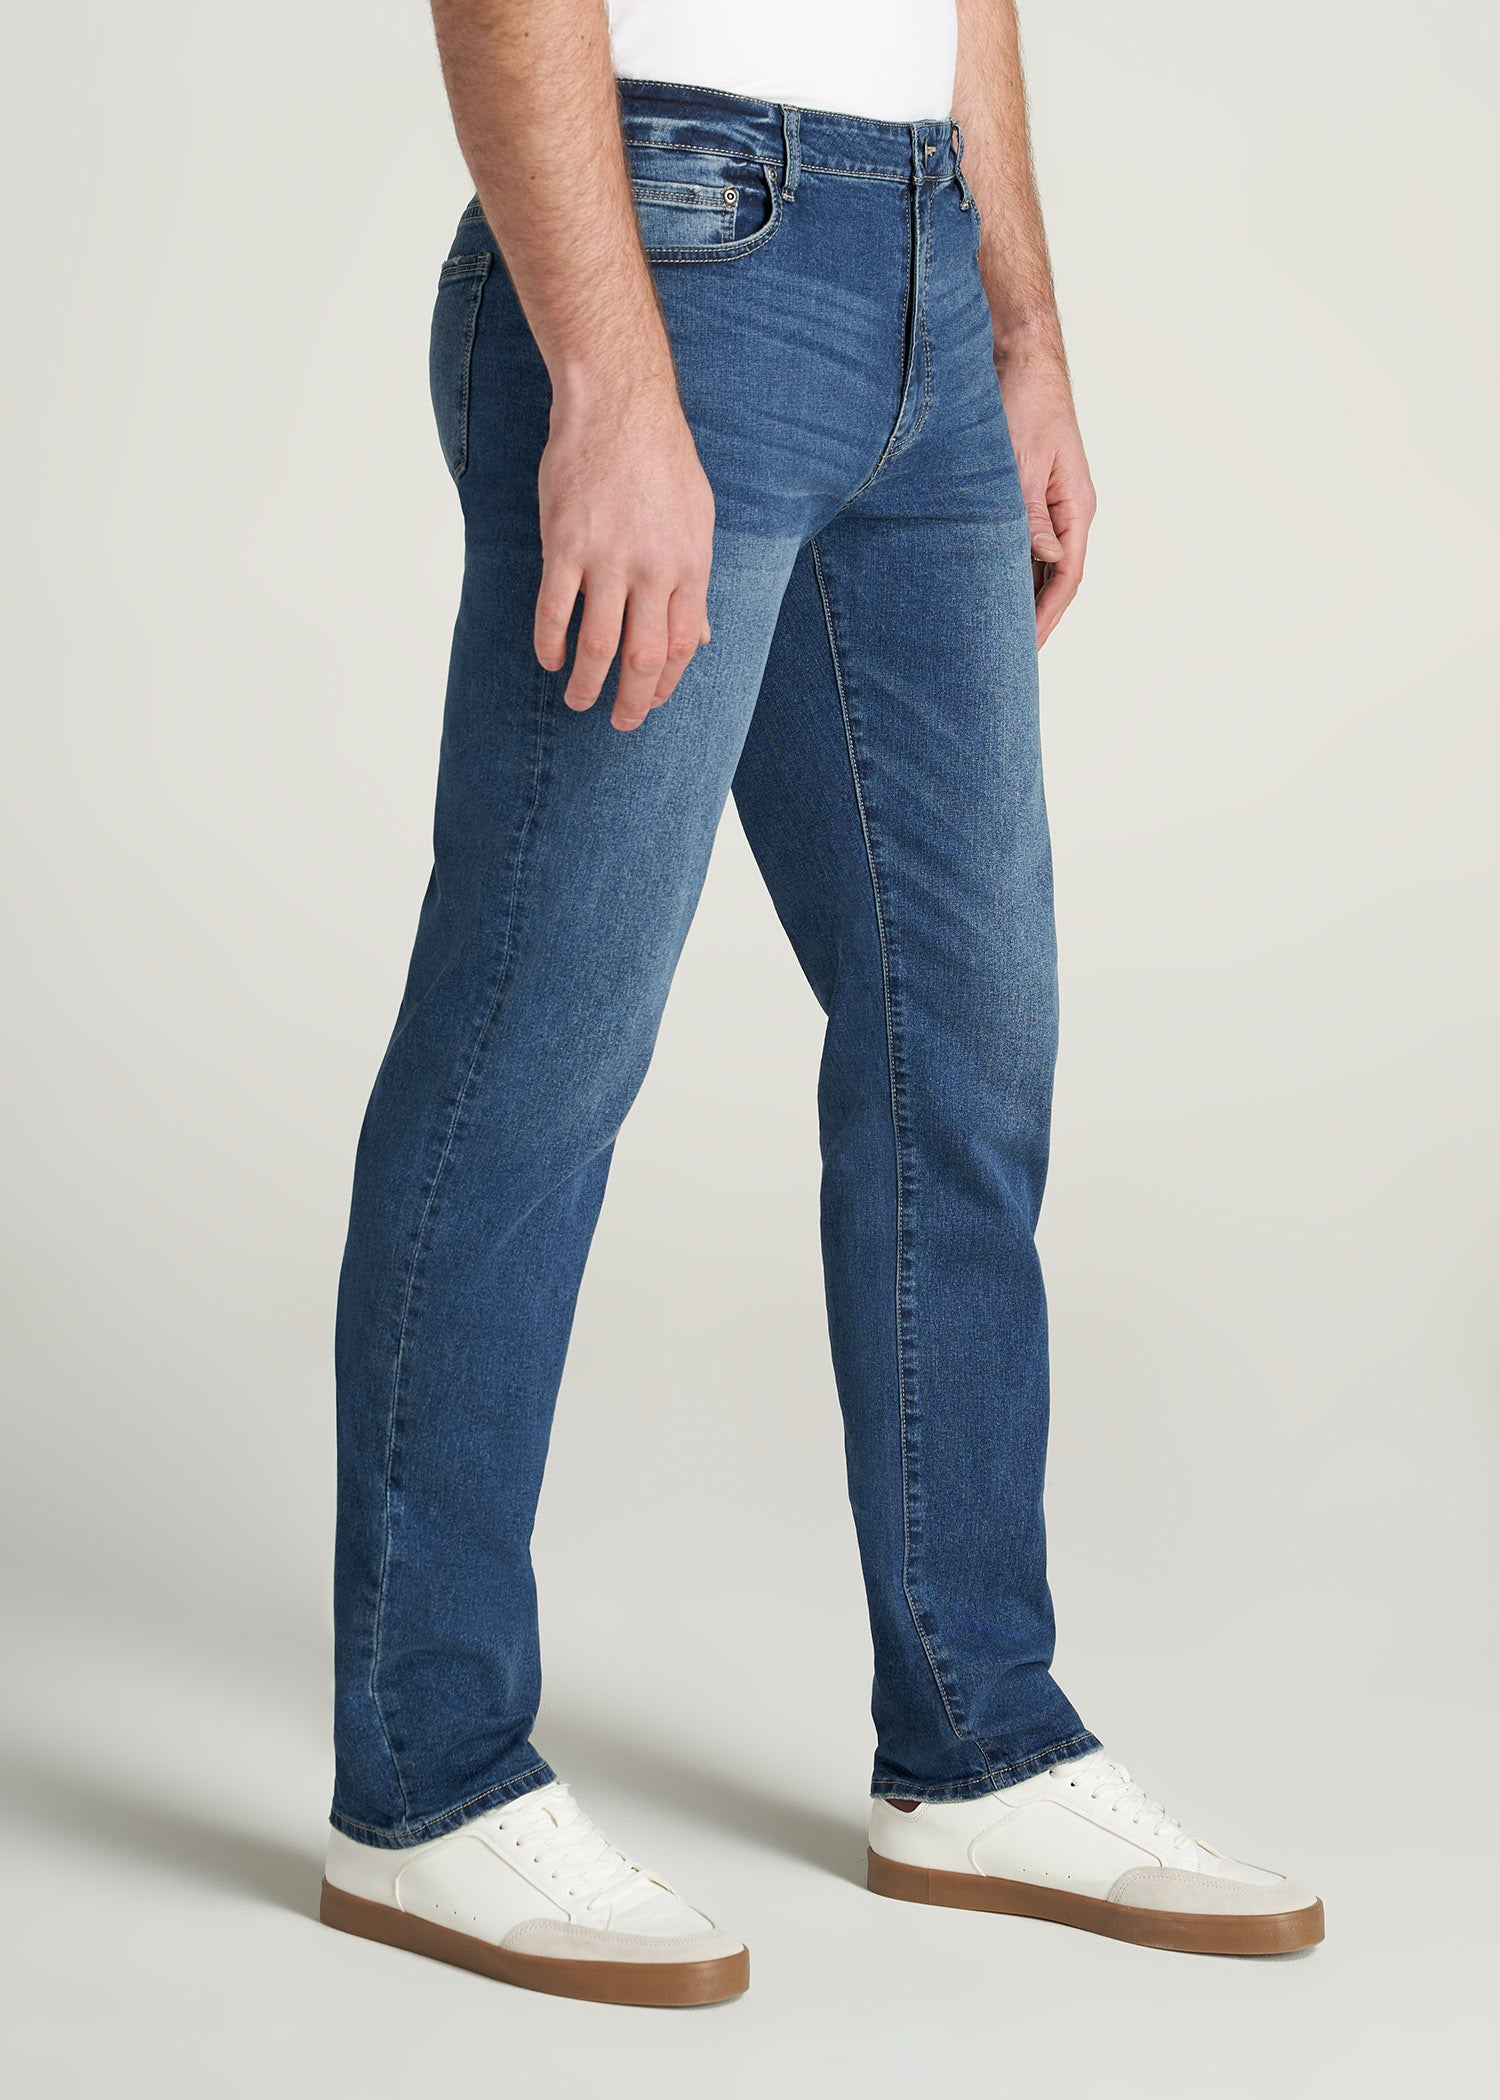 J1 STRAIGHT LEG Jeans for Tall Men in Signature Fade